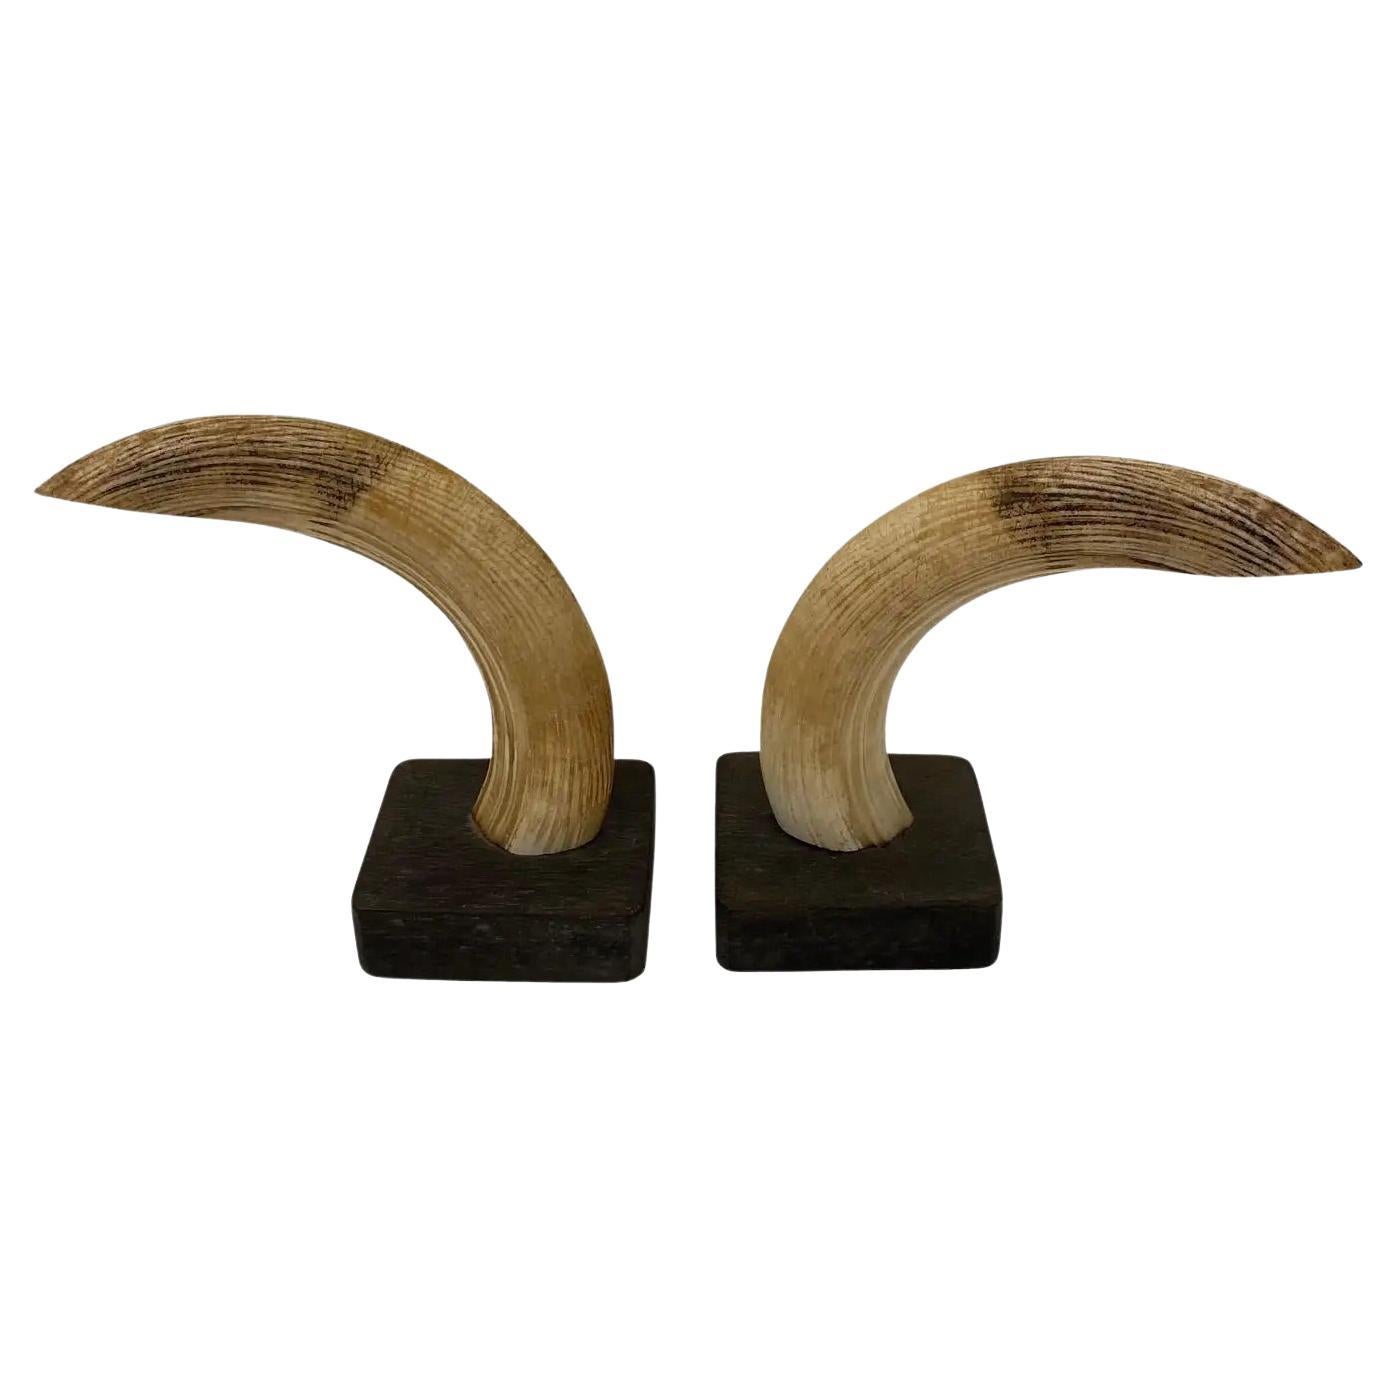 Pair of Bookends Natural Hippopotamus Teeth Mounted, Turn-of-the-Century